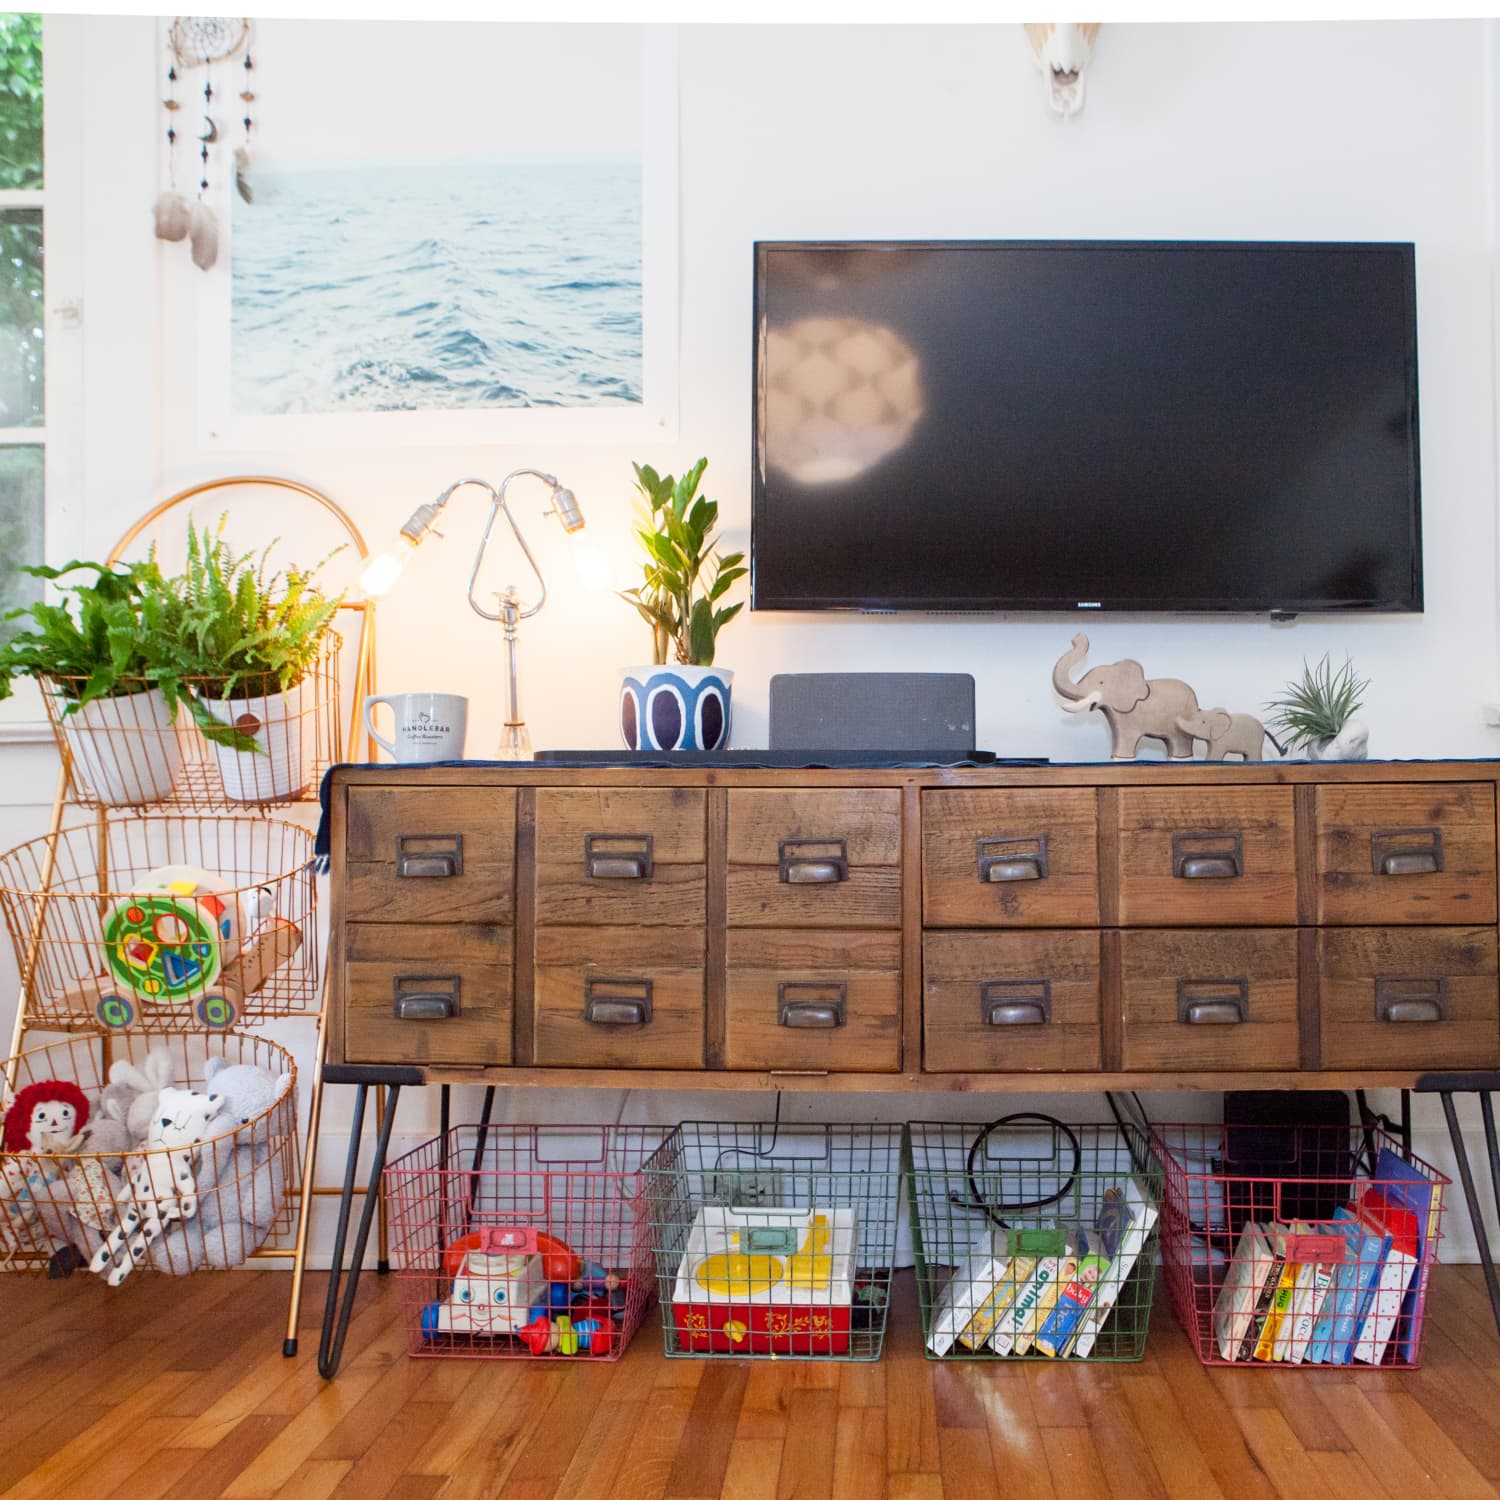 Where to Buy Home Organizers Online